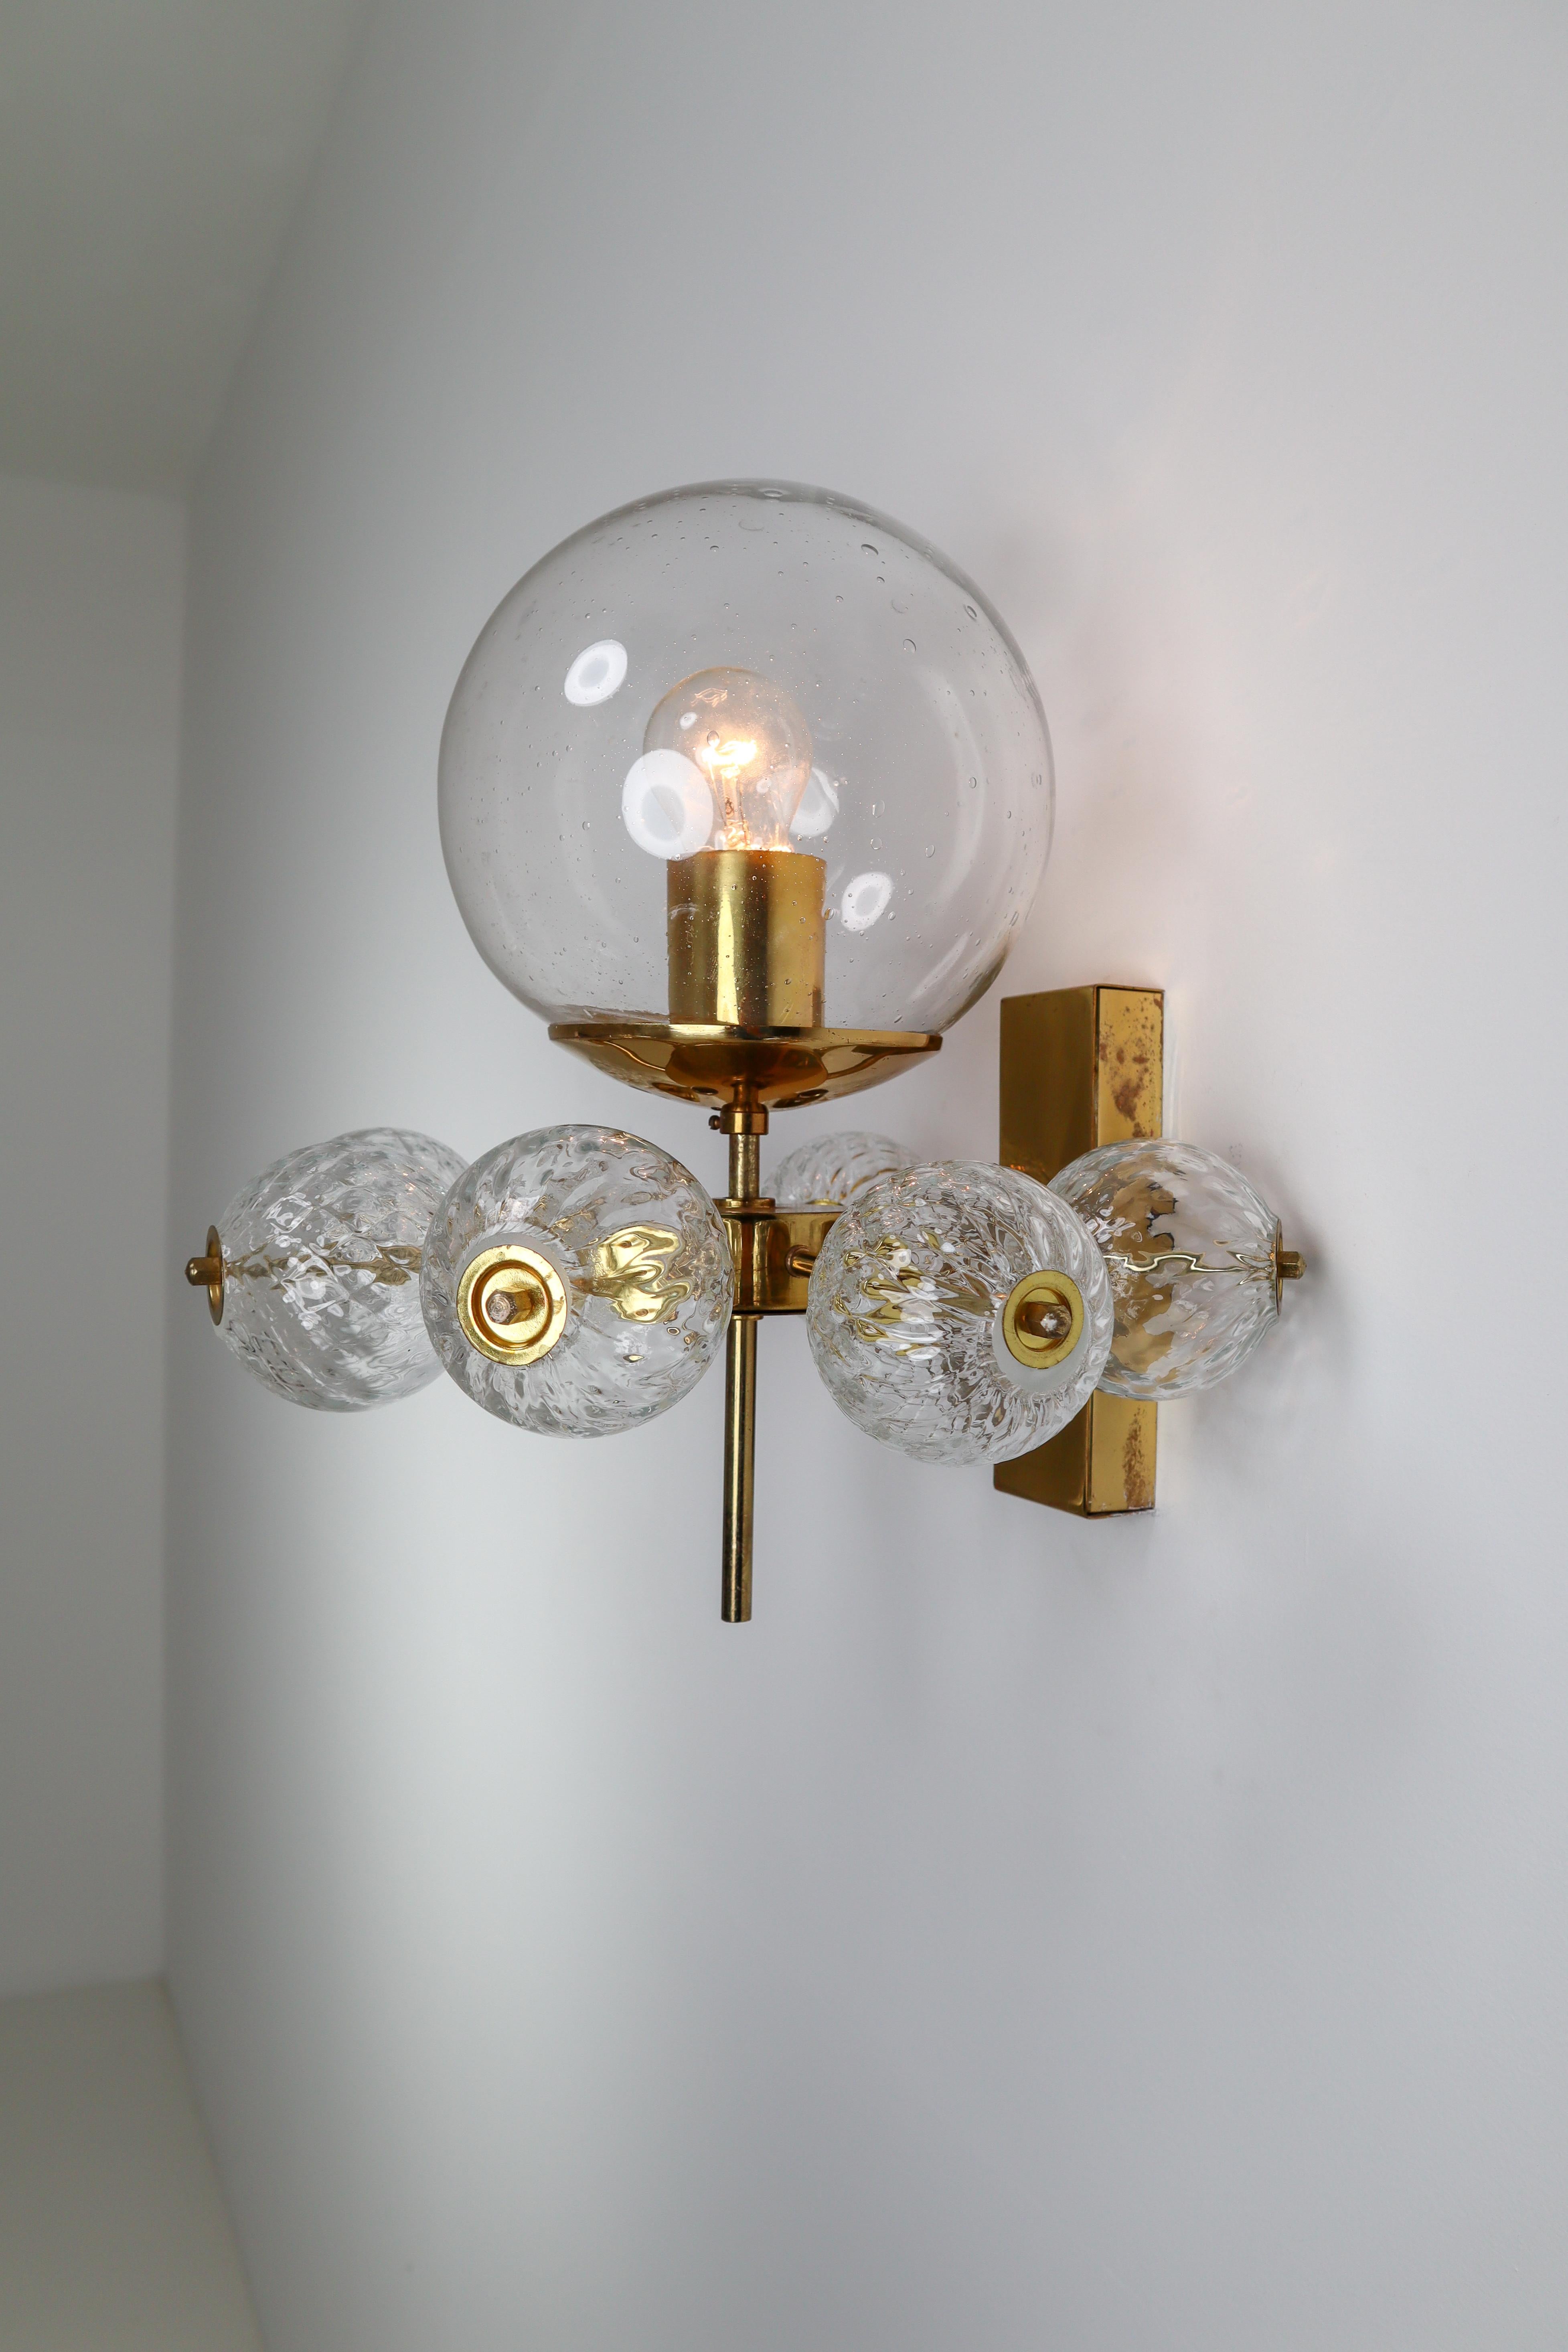 Mid-Century Modern Hotel Wall Chandeliers with Brass Fixture, European, 1970s For Sale